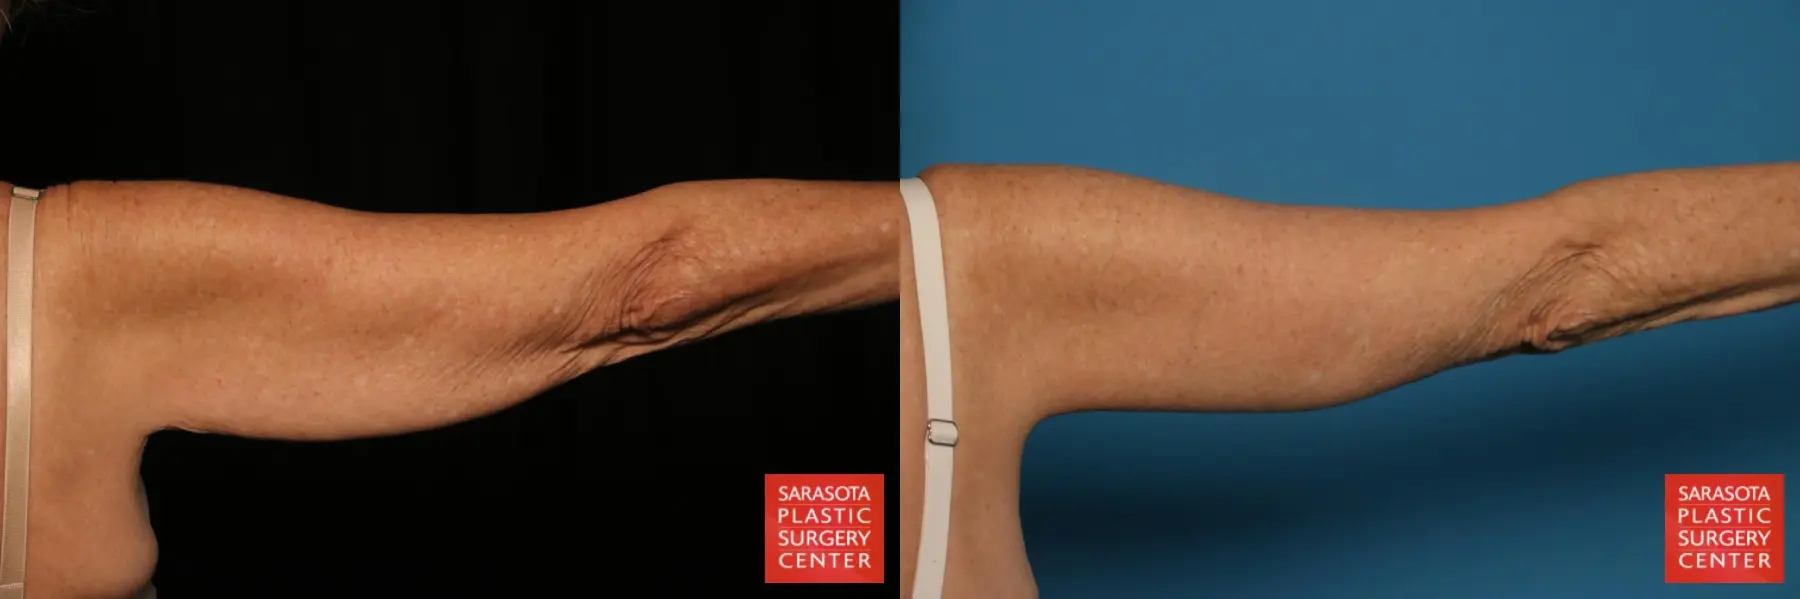 Arm Lift: Patient 10 - Before and After 5